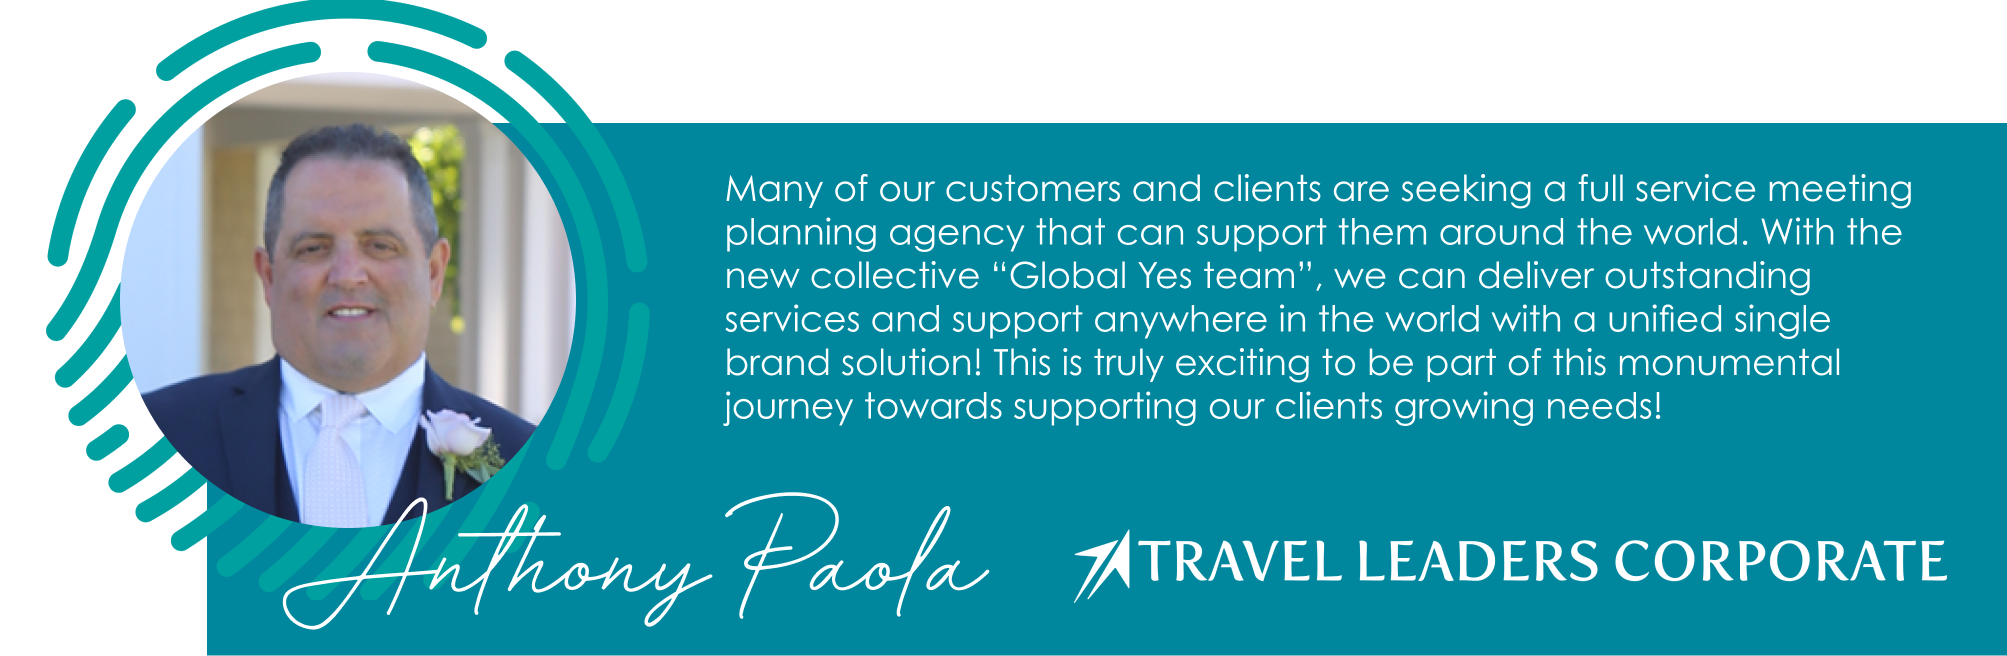 Many of our customers and clients are seeking a full service meeting planning agency that can support them around the world. With the new collective “Global Yes team”, we can deliver outstanding services and support anywhere in the world with a unified single brand solution! This is truly exciting to be part of this monumental journey towards supporting our clients growing needs! 